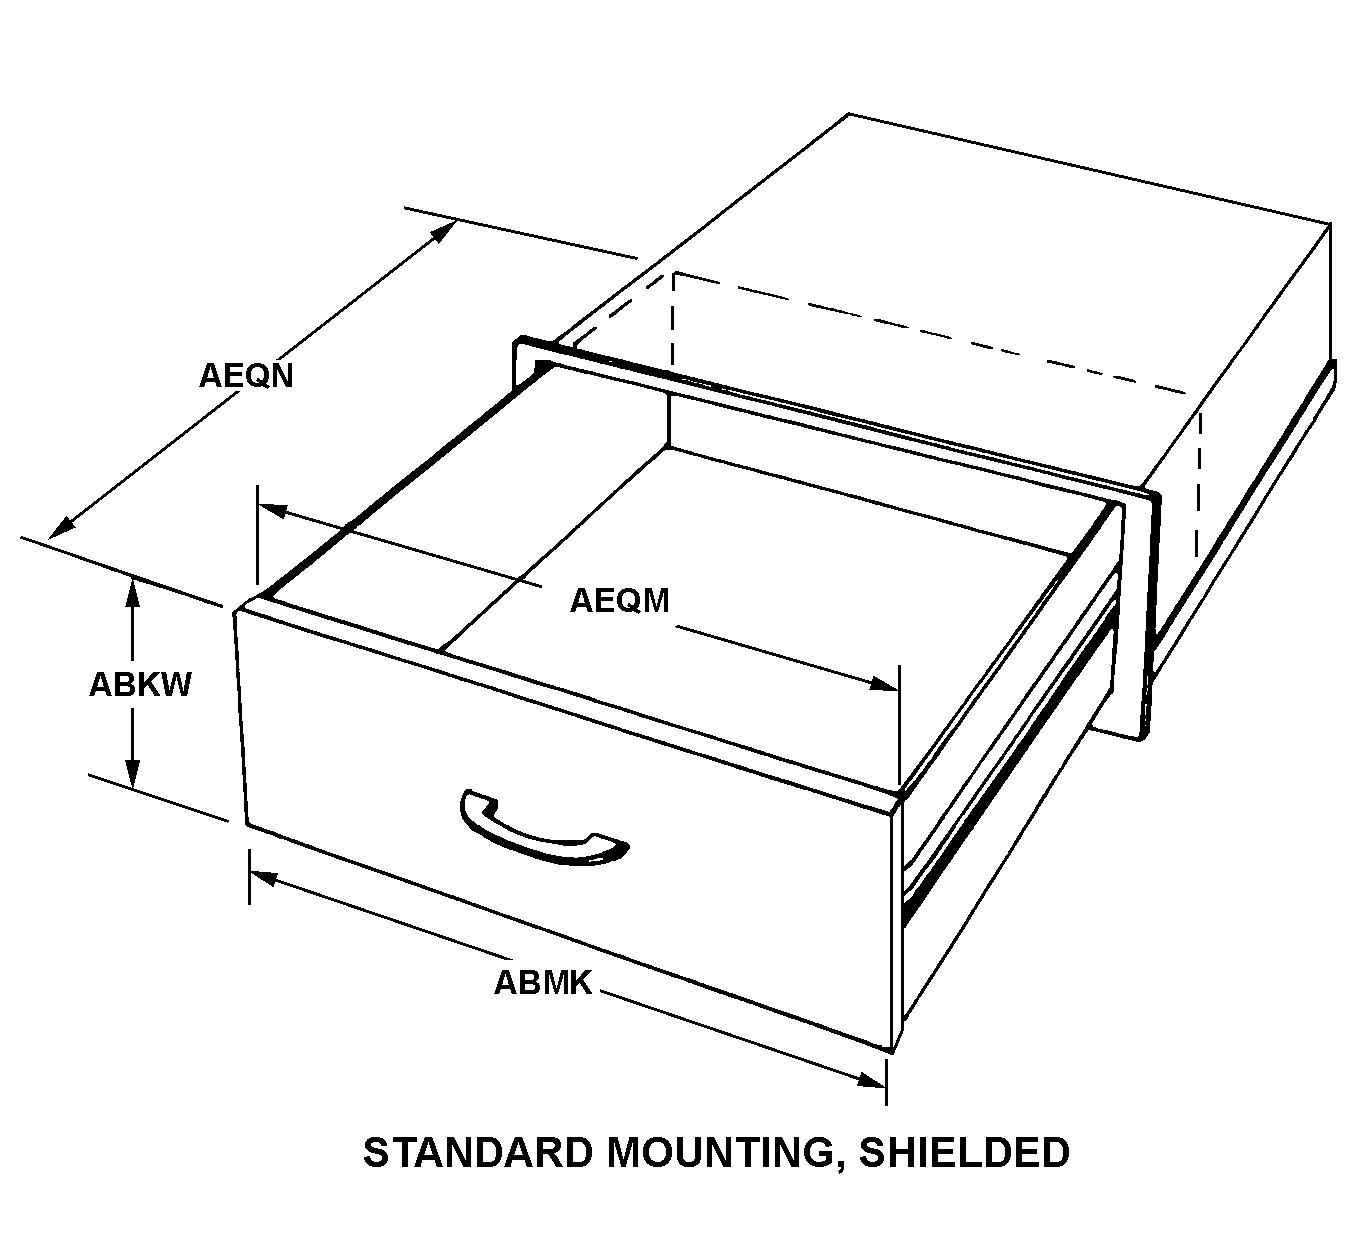 STANDARD MOUNTING, SHIELDED style nsn 5975-01-574-0217